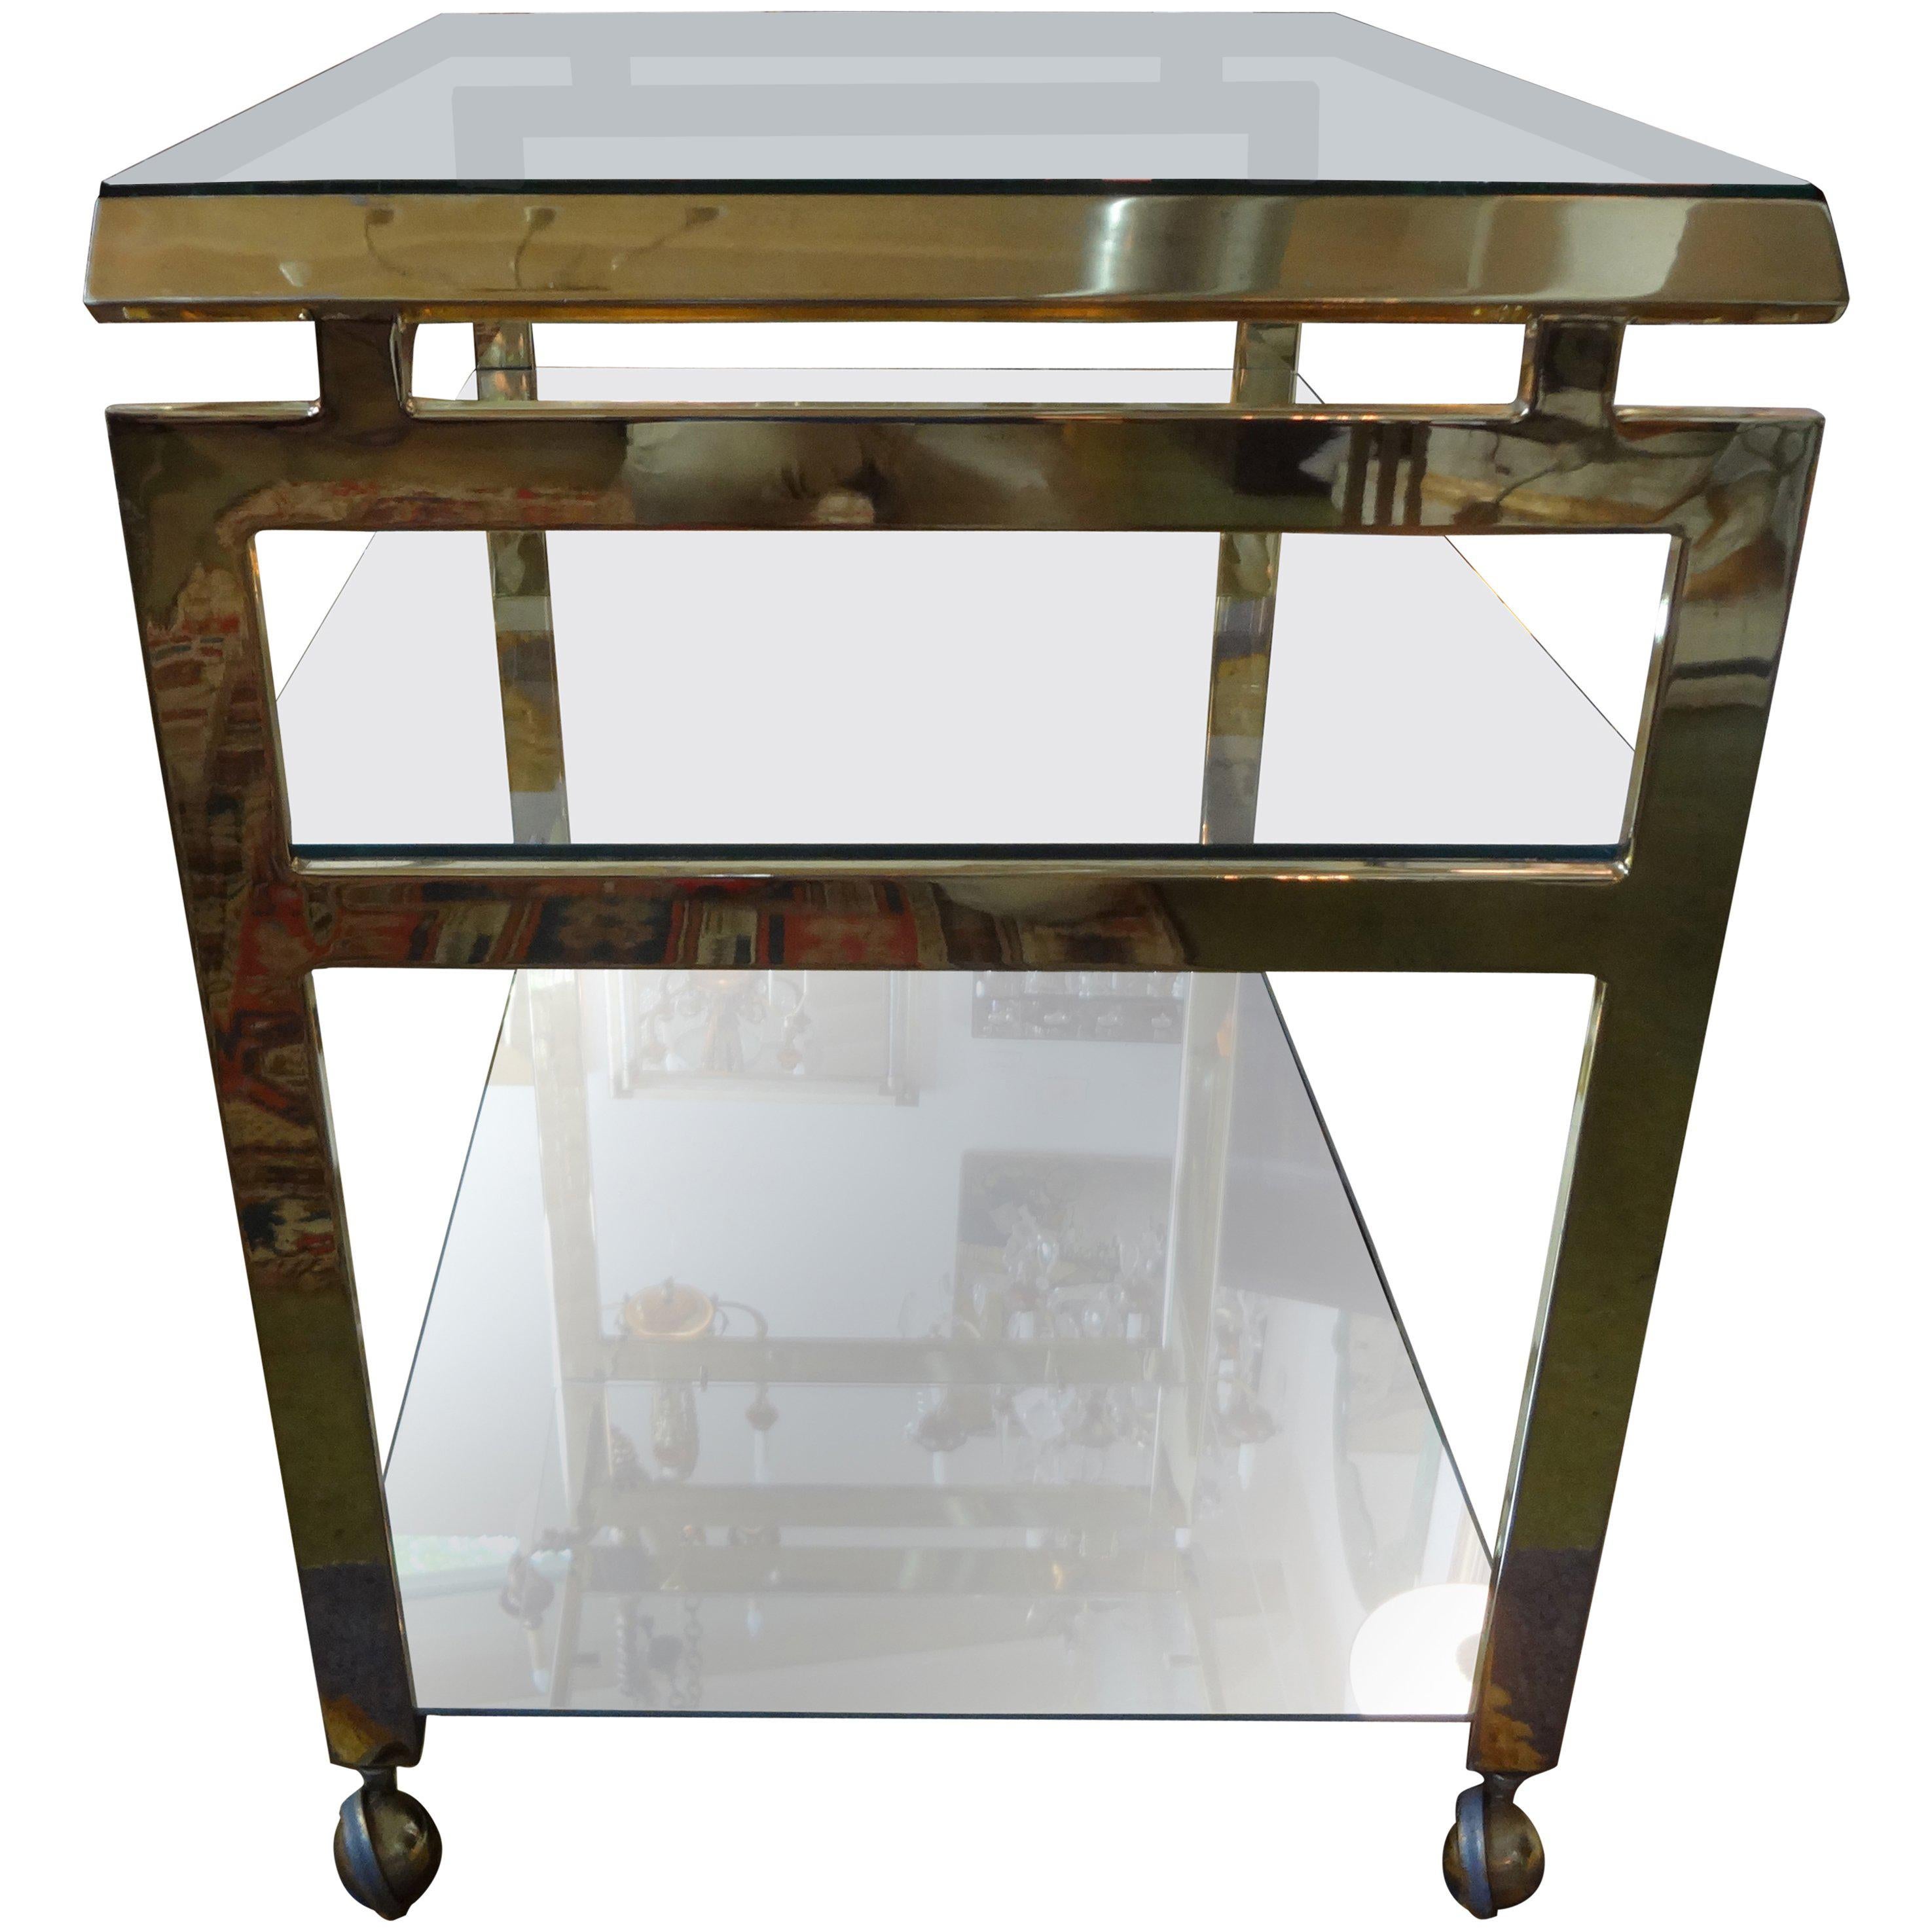 Italian Mid-Century Modern brass bar cart.
Italian Mid-Century Modern seamless brass bar cart, serving cart, drinks cart or cocktail trolley. This Italian service cart has an asian modern feel with two new glass and mirrored shelves. Featured